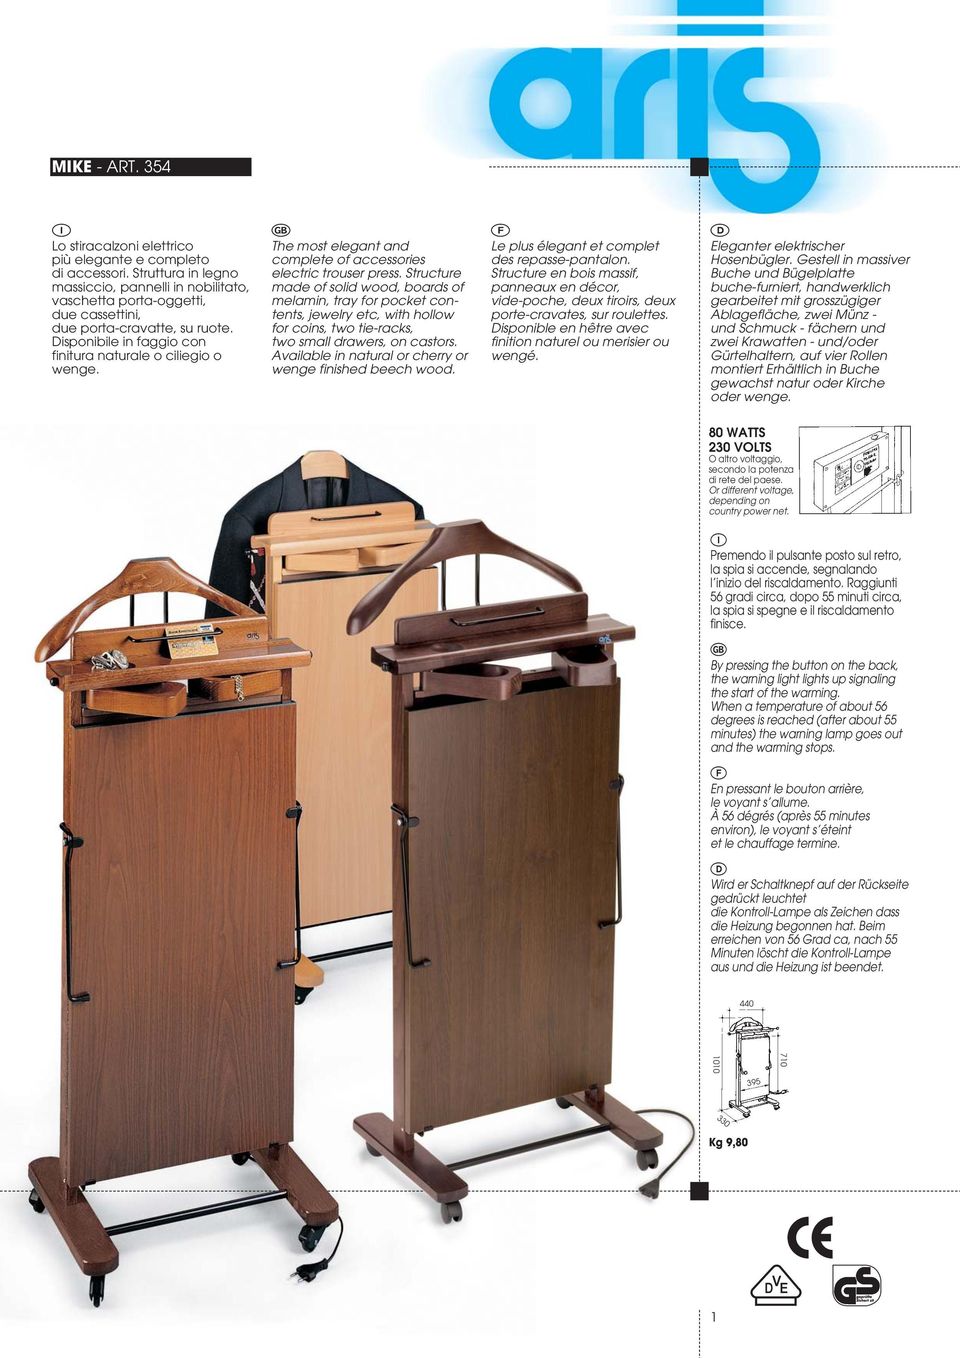 The most elegant and complete of accessories electric trouser press.